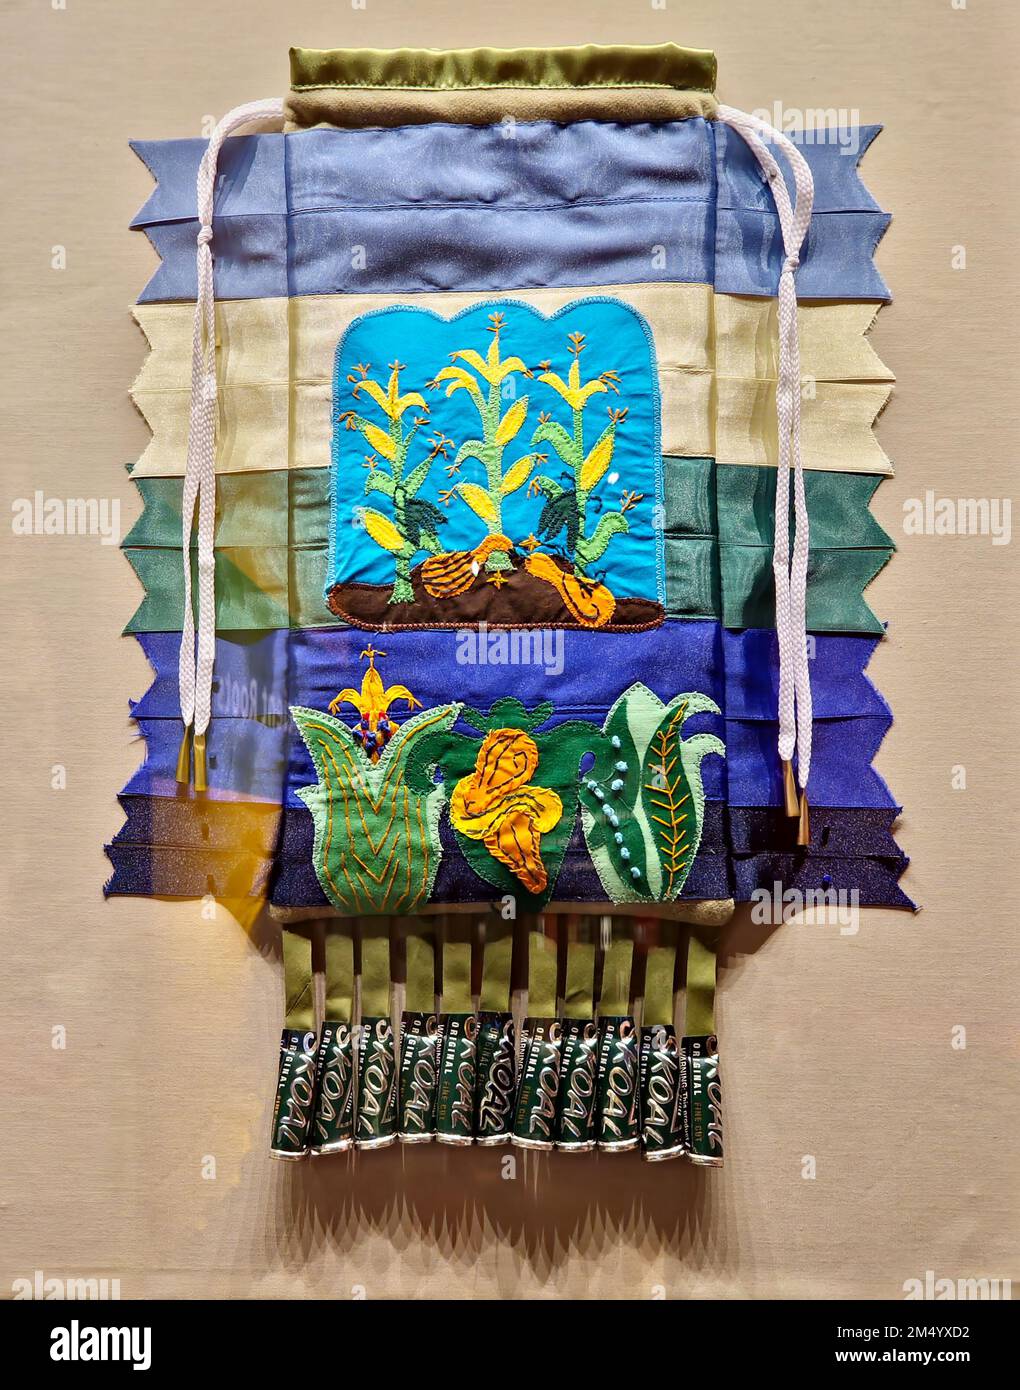 Handcrafted drawstring pouch with appliqued corn and squash designs by Absentee Shawnee Seminole artist Marilyn Lovins in 2020. Stock Photo